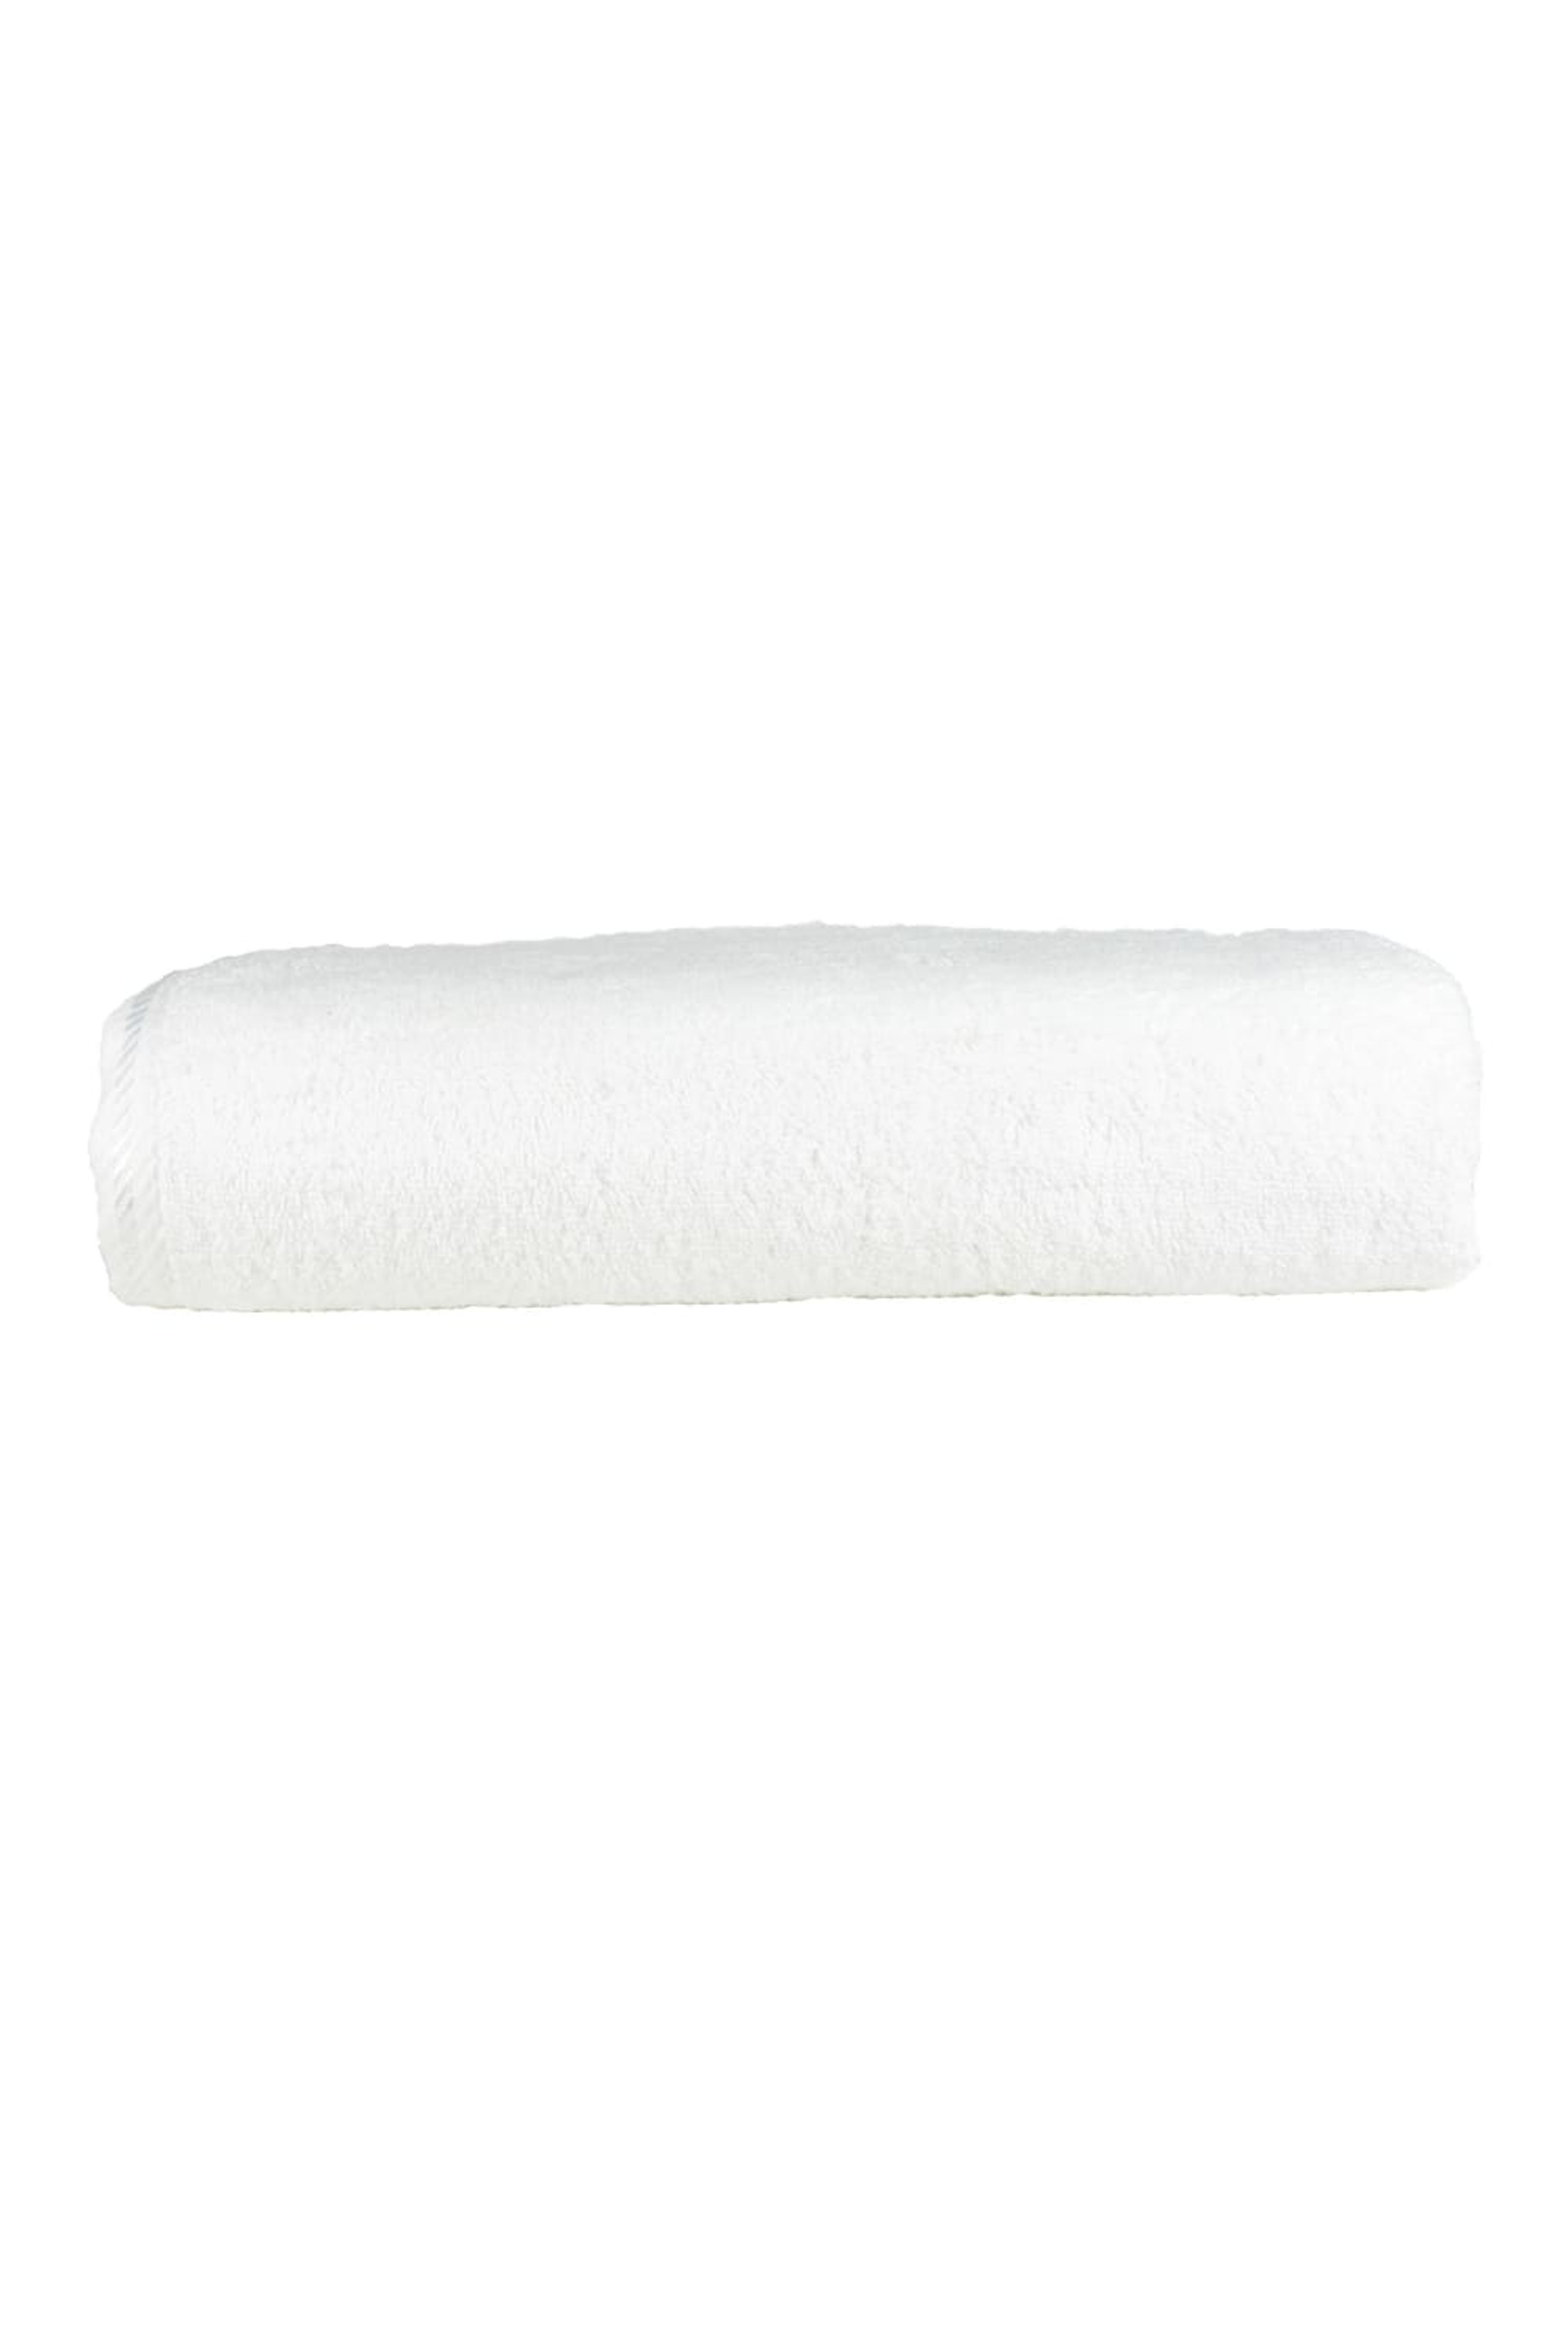 A&R TOWELS A&R TOWELS A&R TOWELS ULTRA SOFT BIG TOWEL (WHITE) (ONE SIZE)